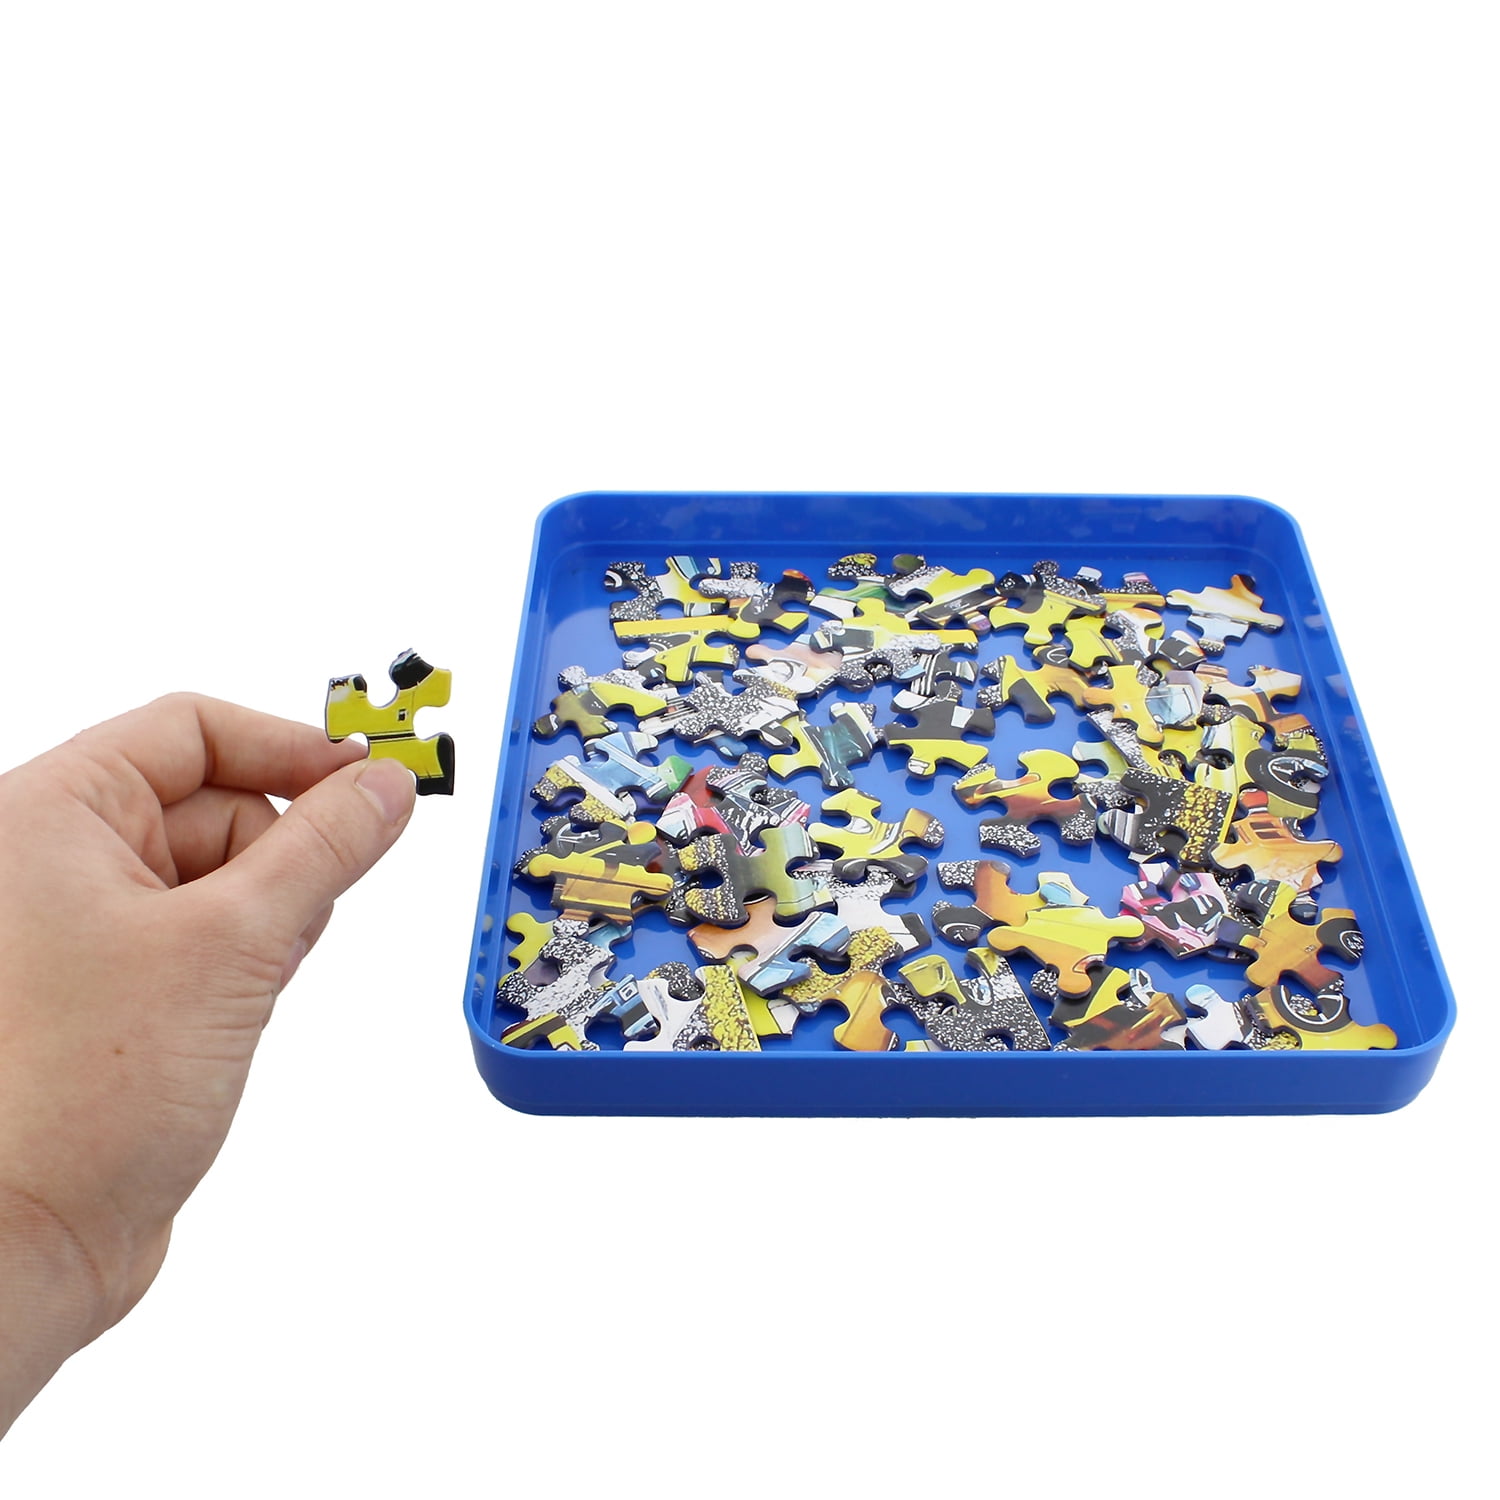 Puzzle Sorting Trays - 7 Count (Pack of 1)